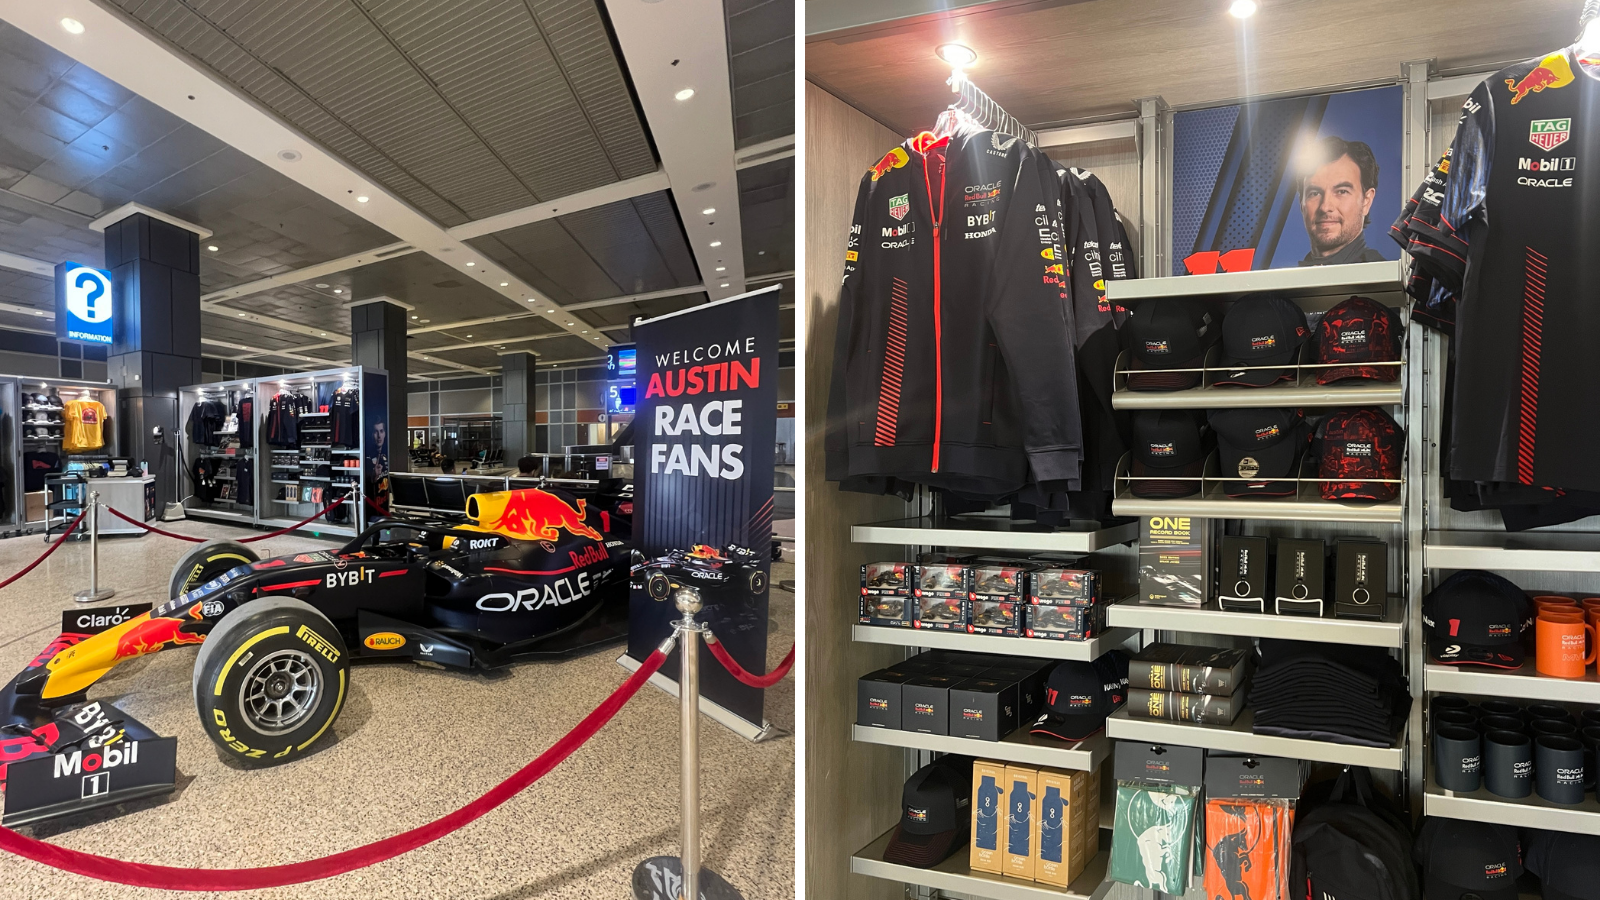 A picture of a red bull Formula 1 car and F1 merchandise on display at the airport. 